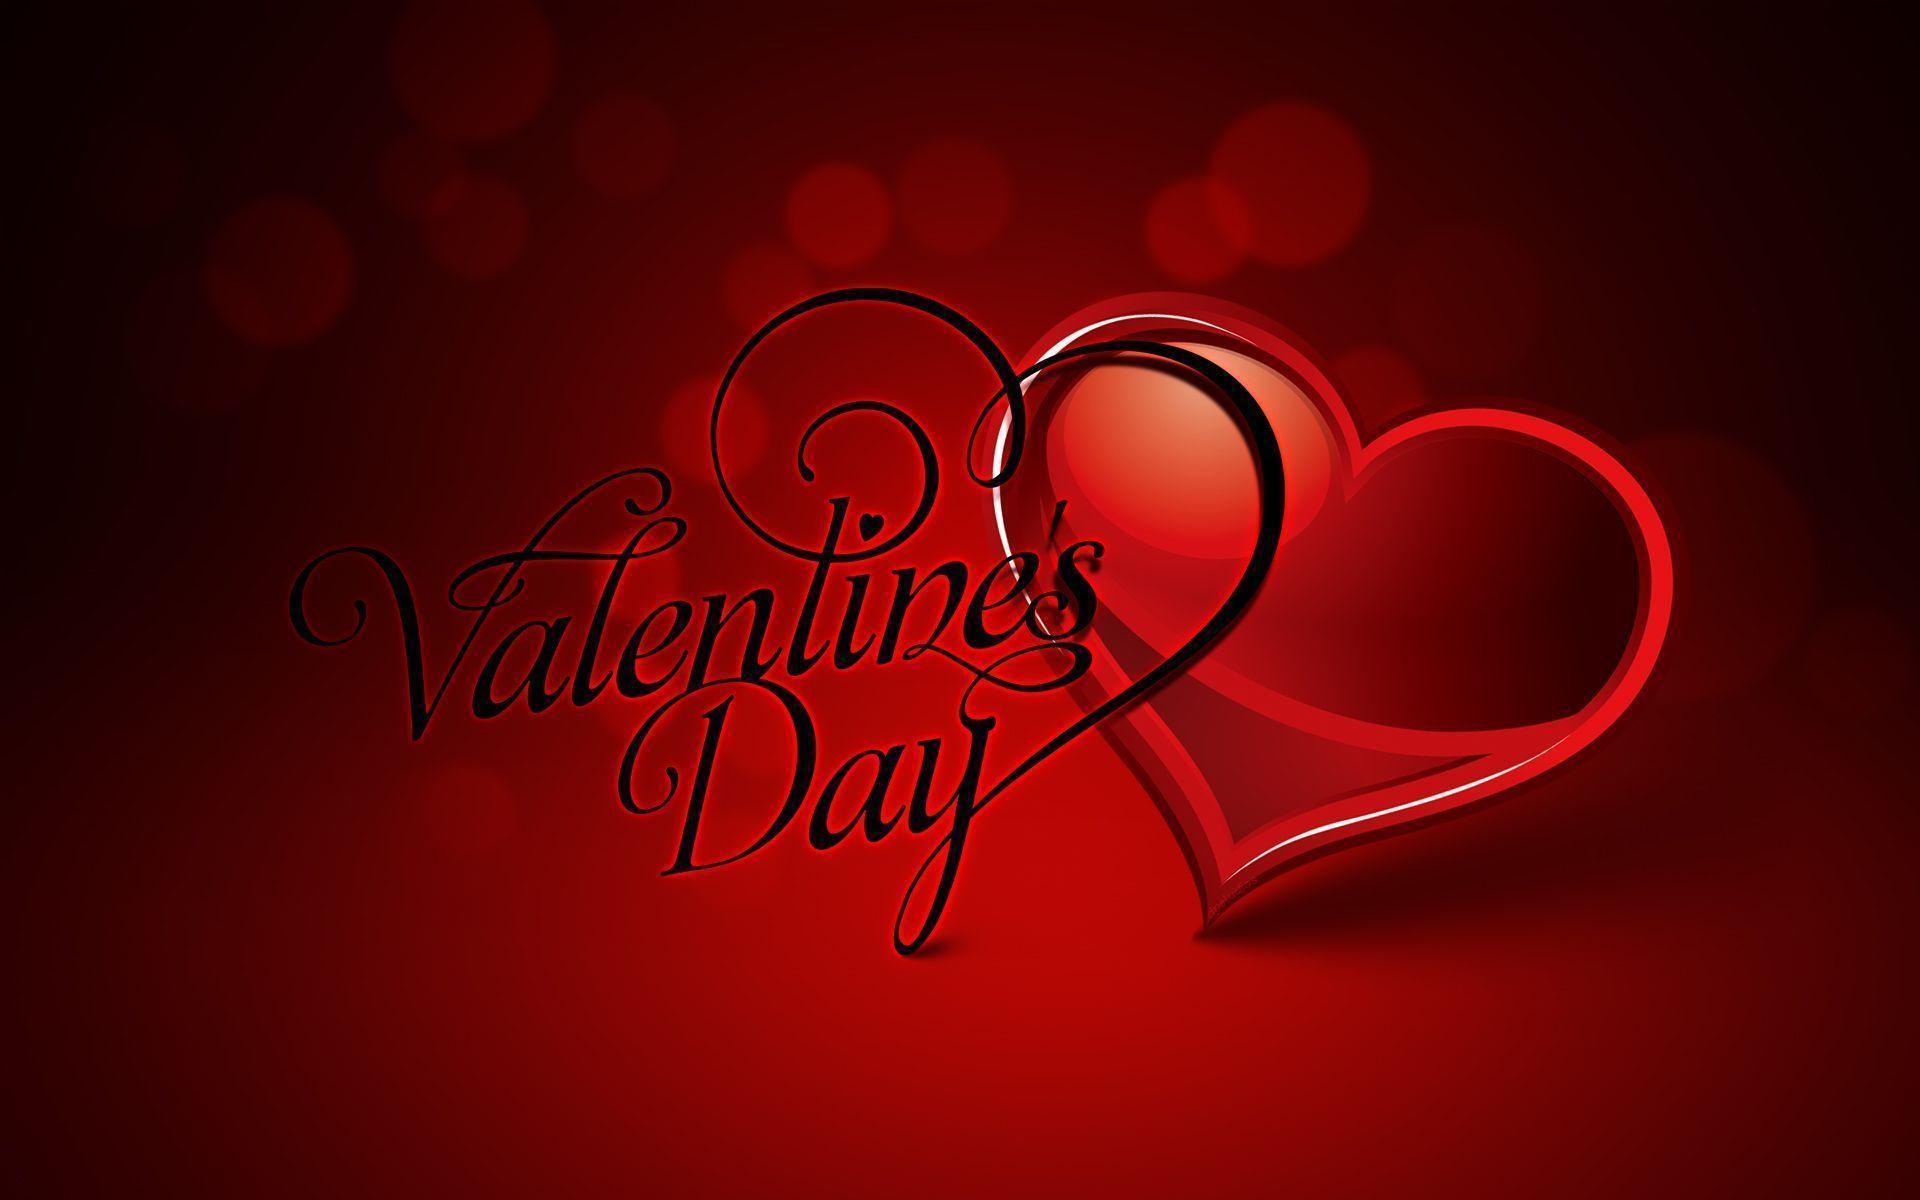 Advance Valentine&;s Day 2015 Image, SMS, Wishes, Quotes, Picture